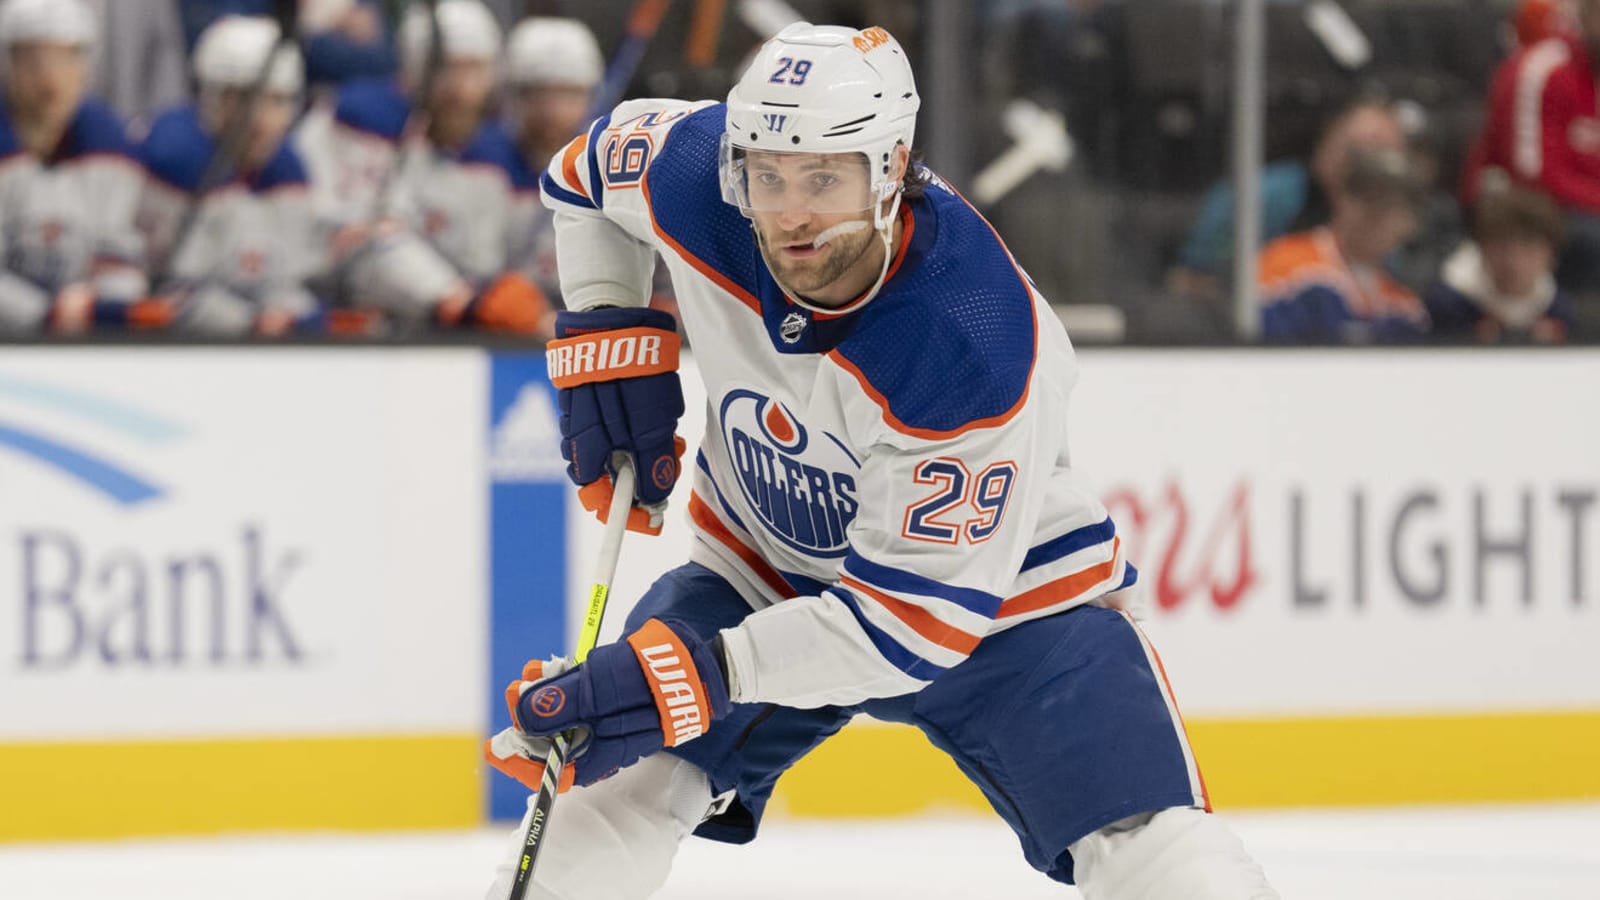 A reason for optimism for the struggling Oilers